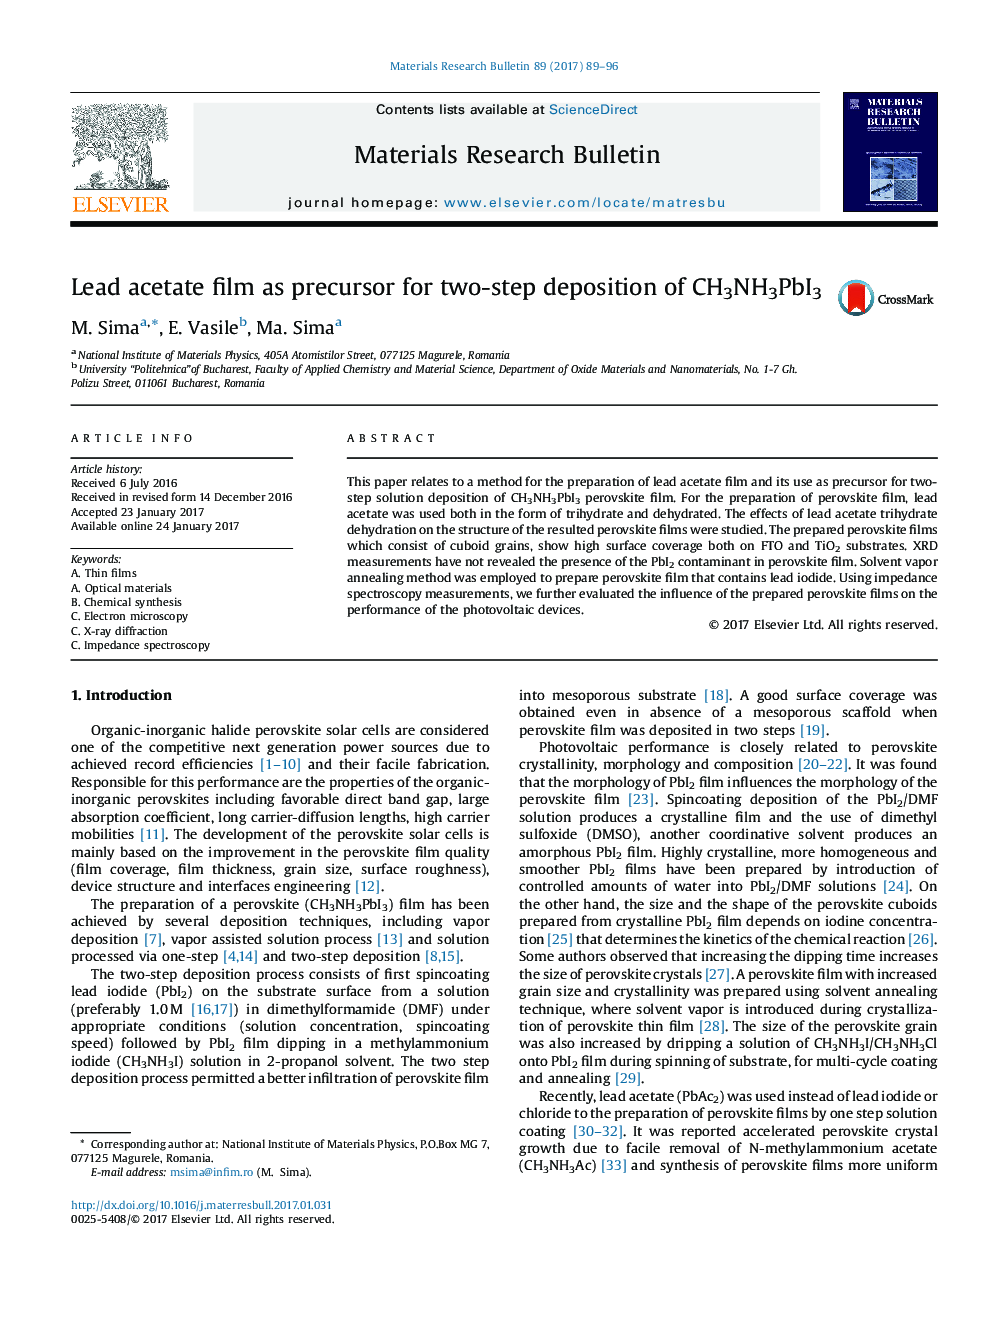 Lead acetate film as precursor for two-step deposition of CH3NH3PbI3